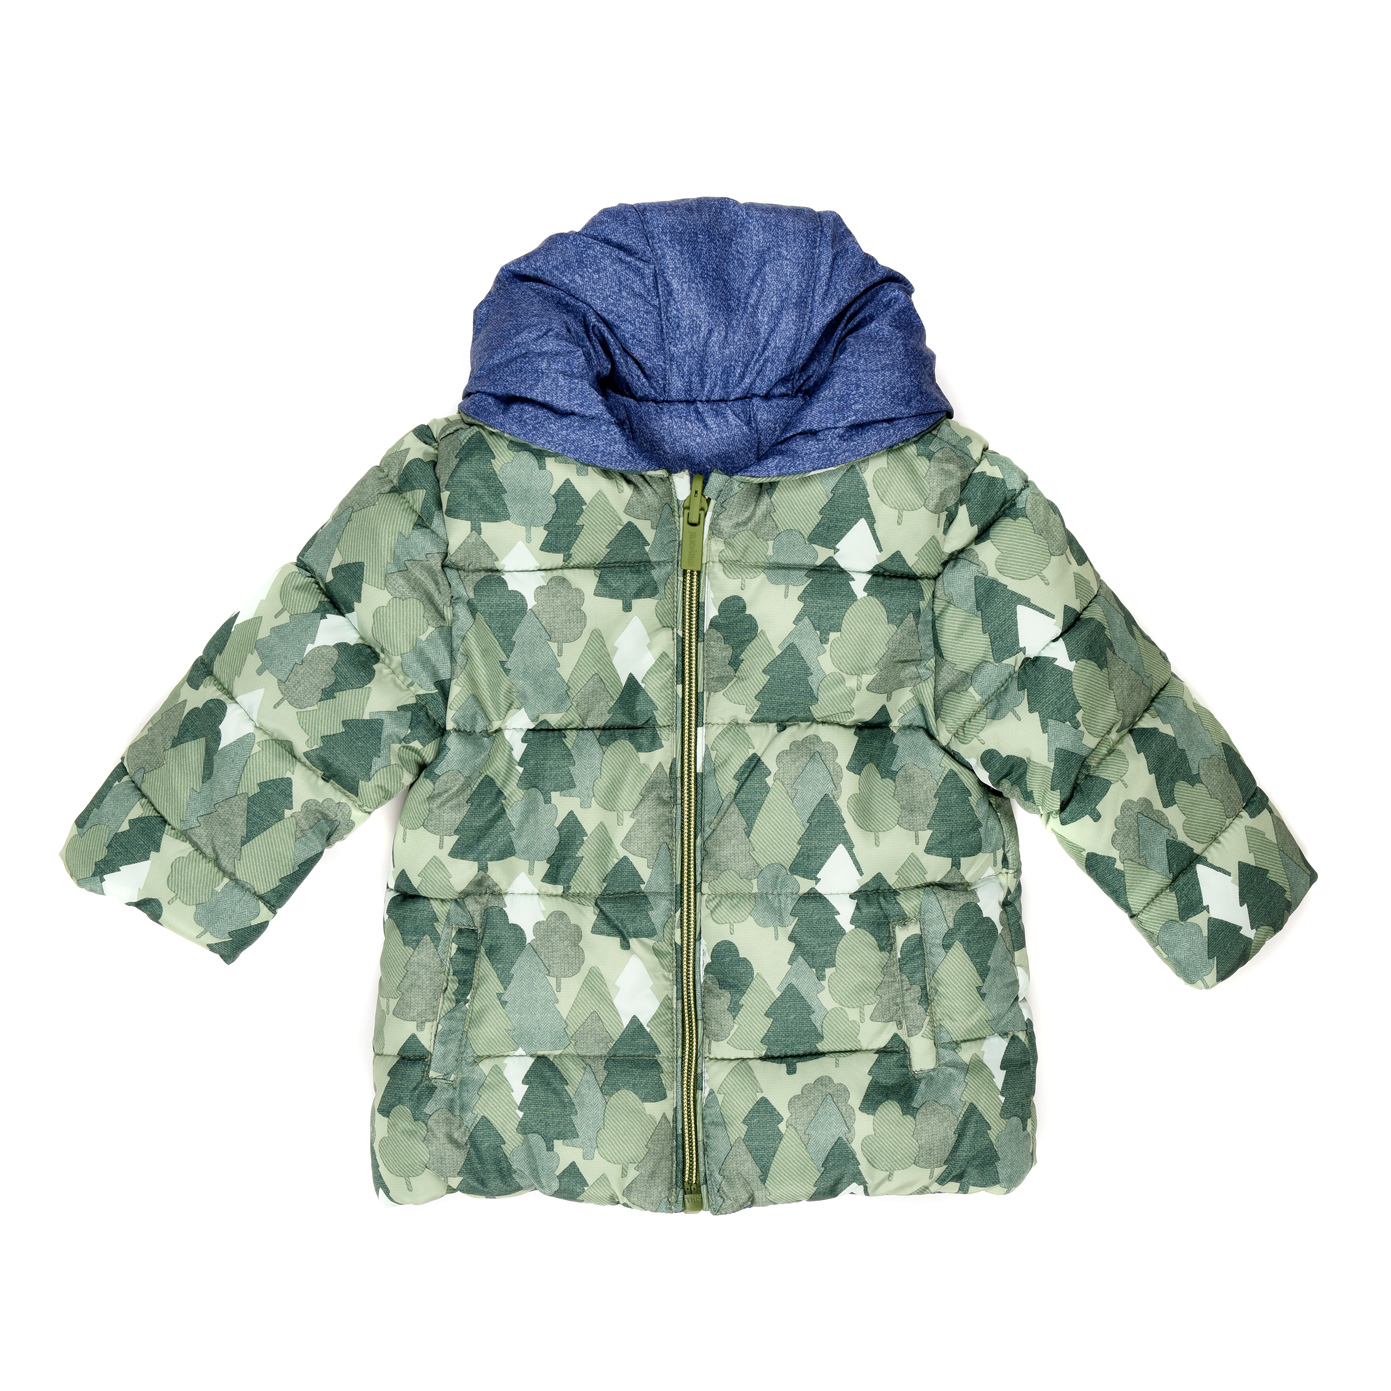 mayoral_green_reversible_hooded_jacket_with_tree_print_73151_1